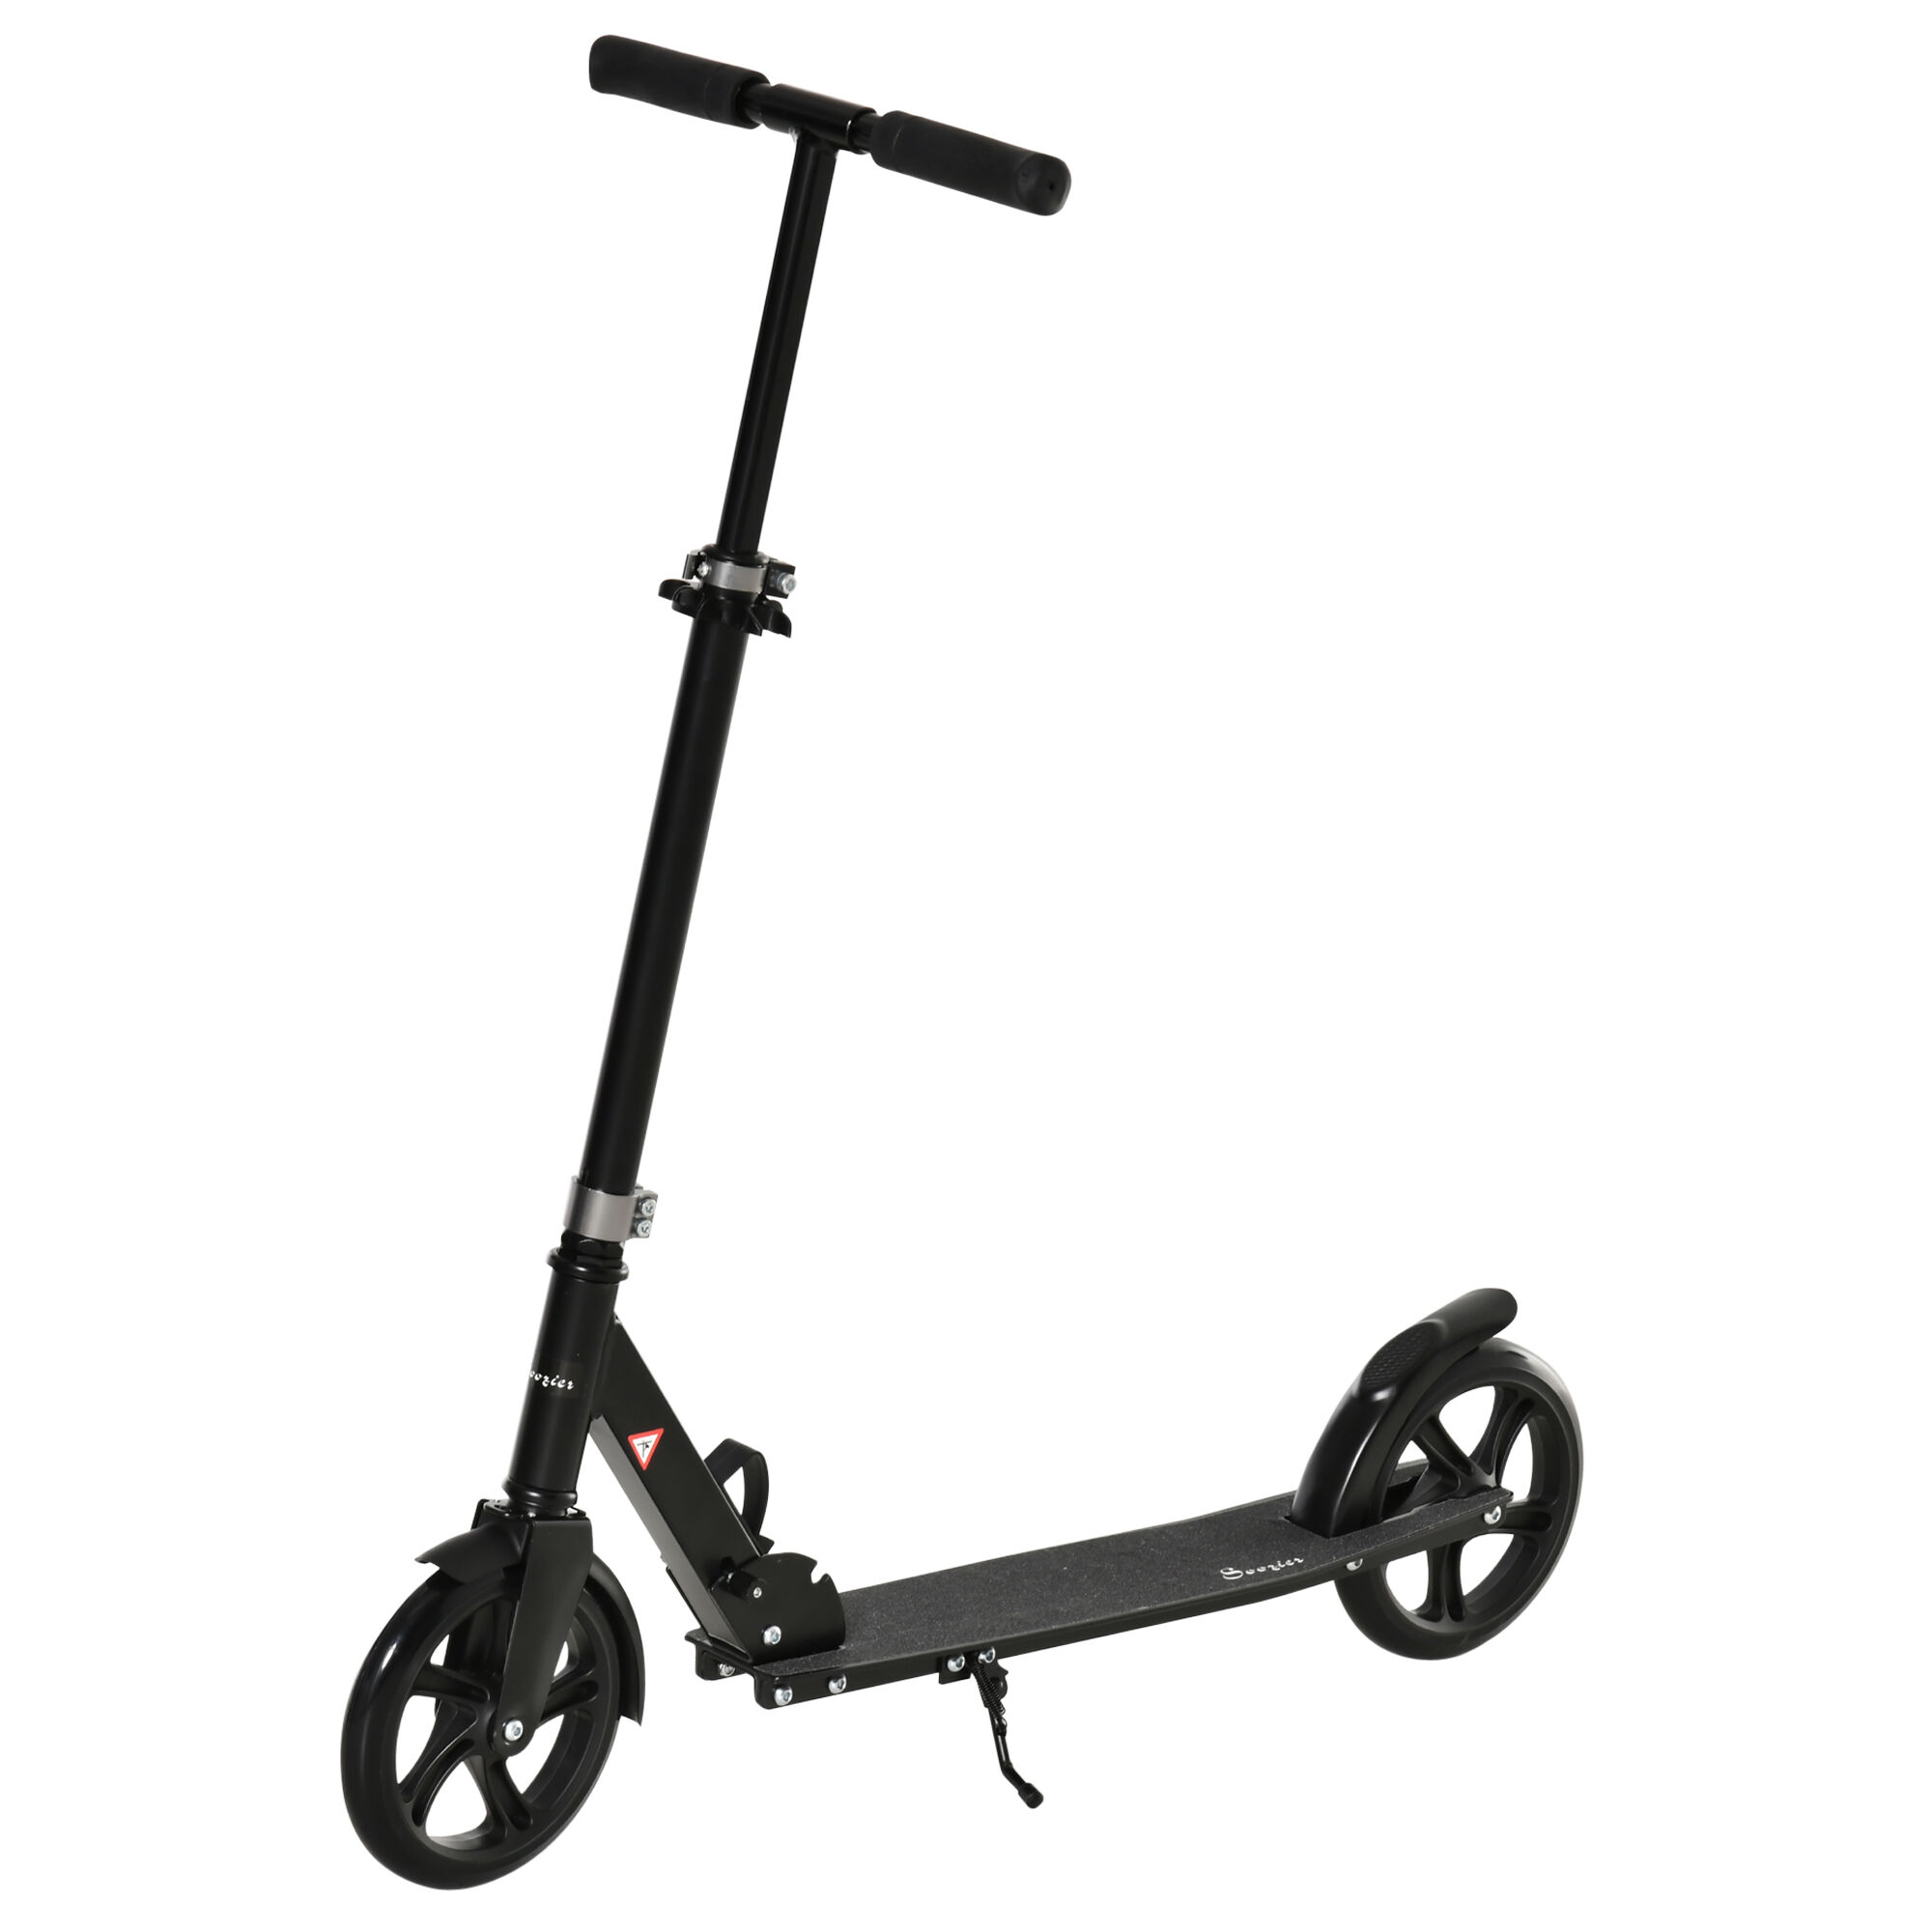 Soozier Adjustable Folding Kick Scooter for Teens & Adults, Big Wheels for Smooth Rides, Easy Transport   Aosom.com